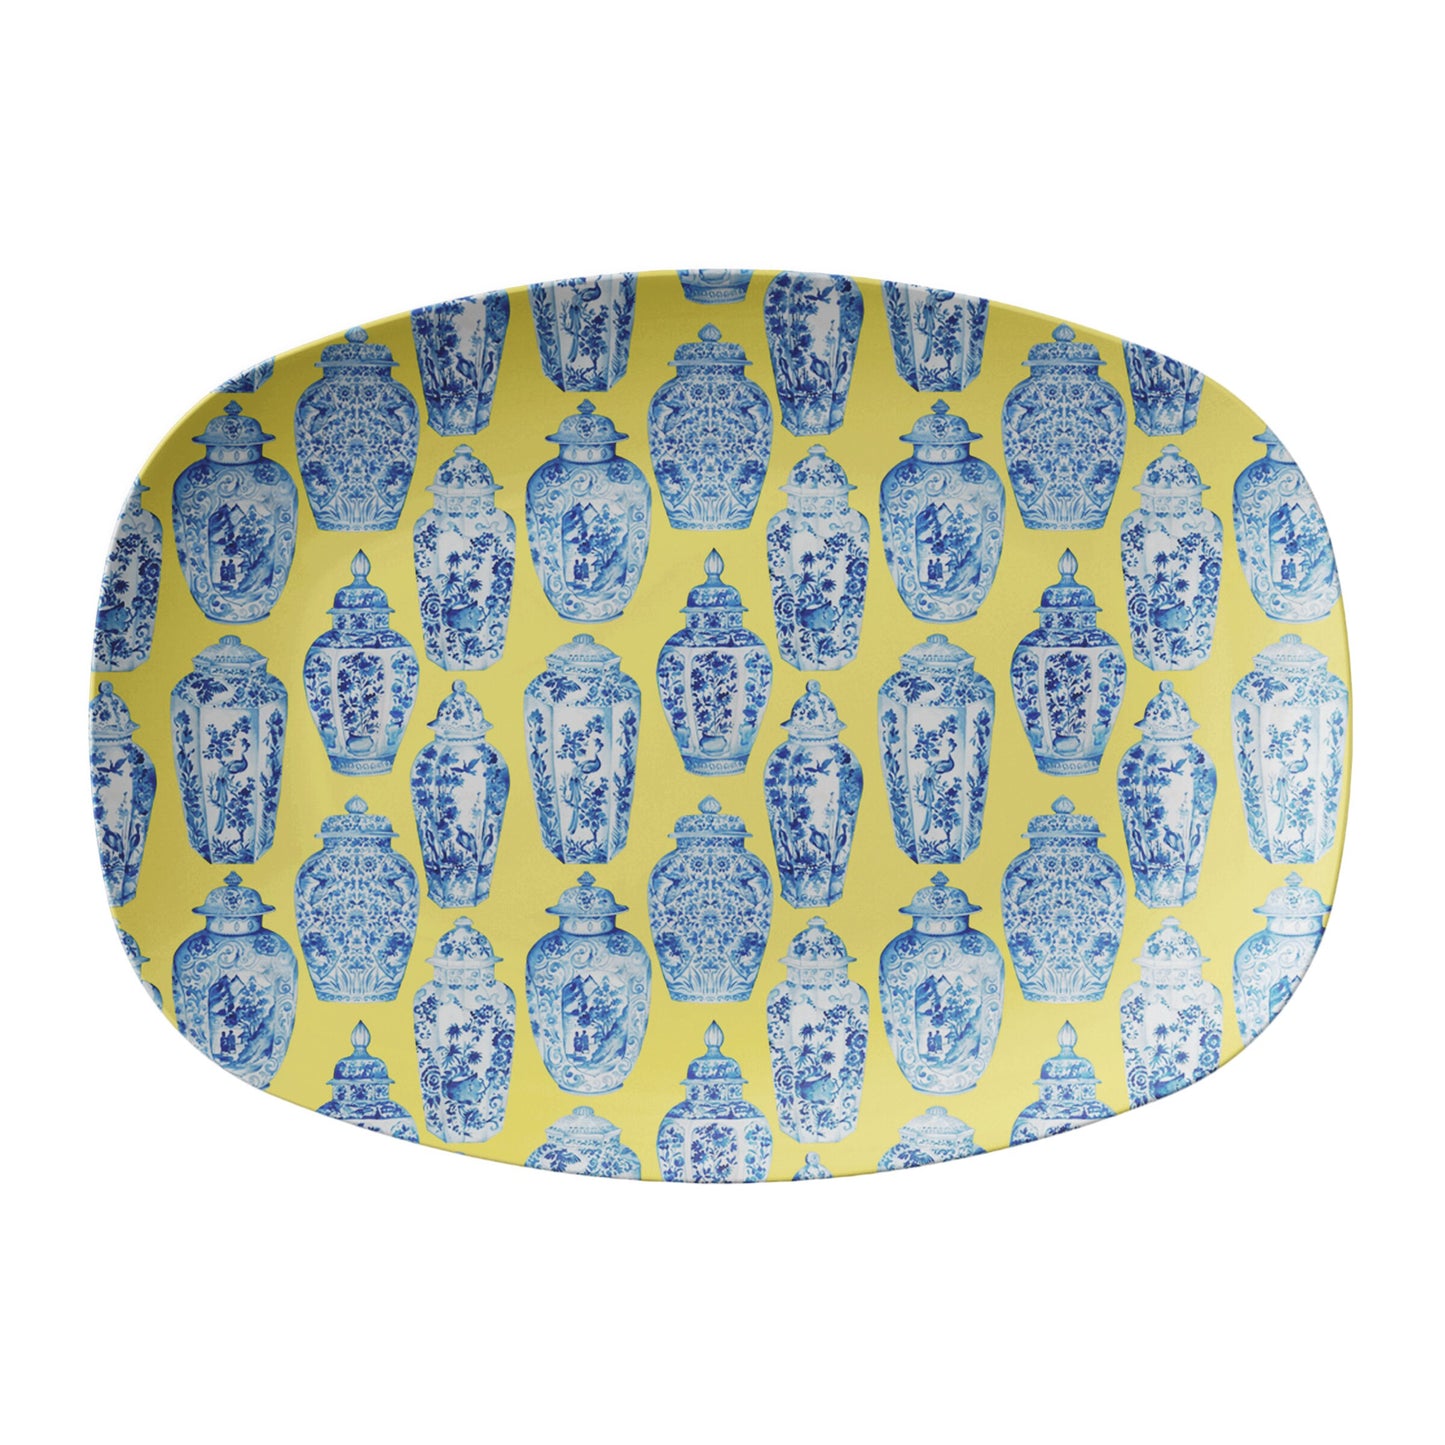 Ginger Jar Serving Platter, Yellow & Blue, Chinoiserie, Luxury Thermosaf Plastic